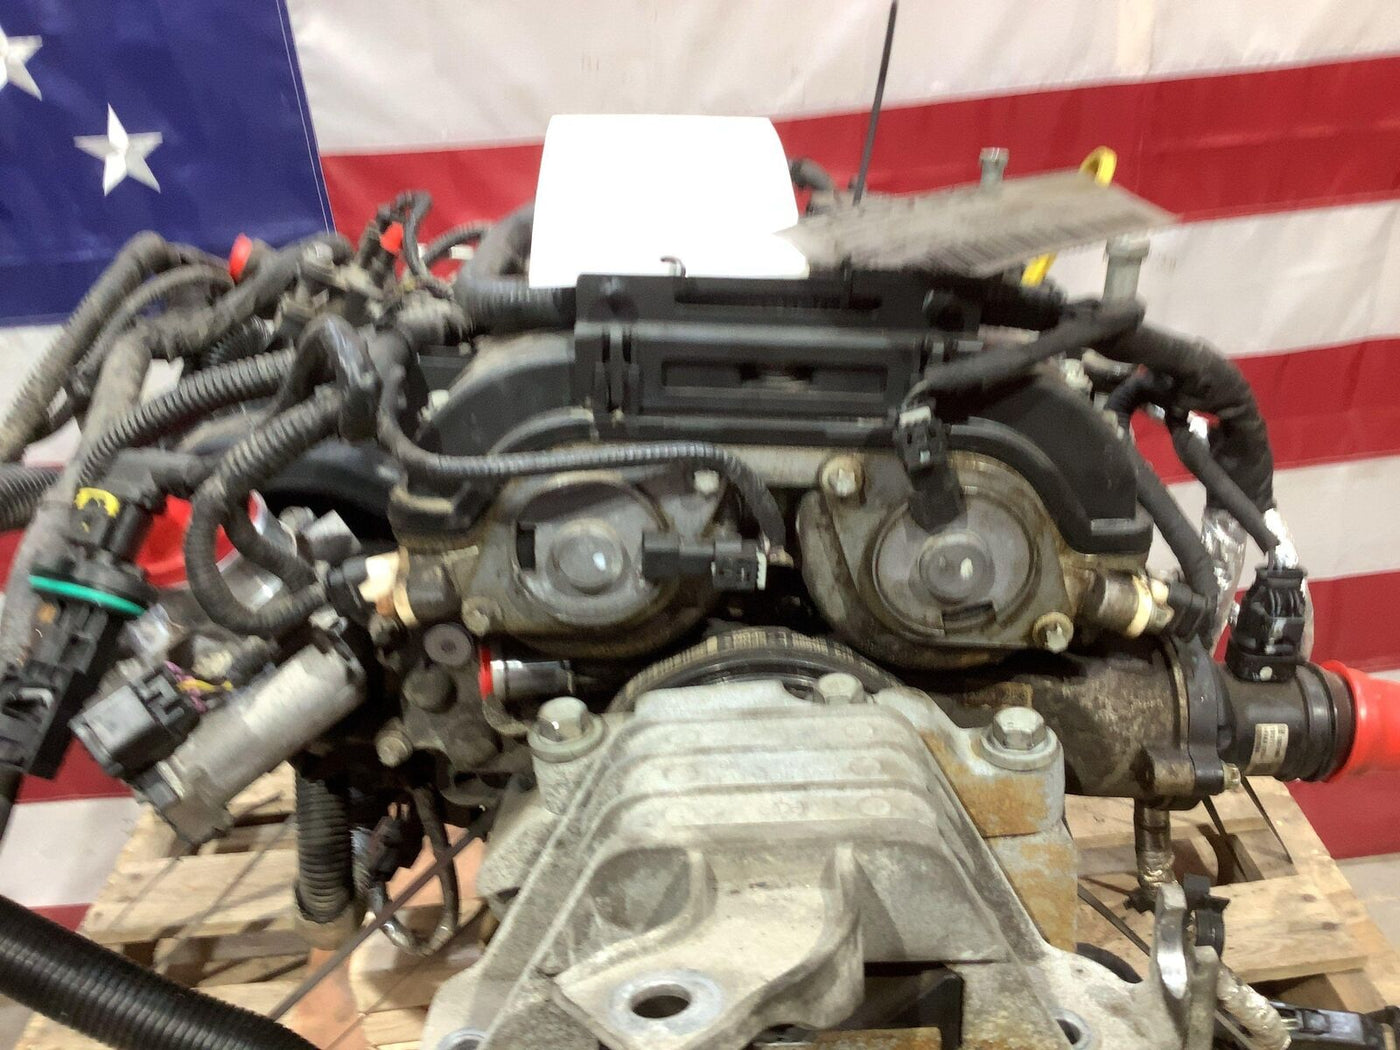 14-16 Cadillac ELR 1.4L Range Extending Engine W/ Accessories (Untested) 123K